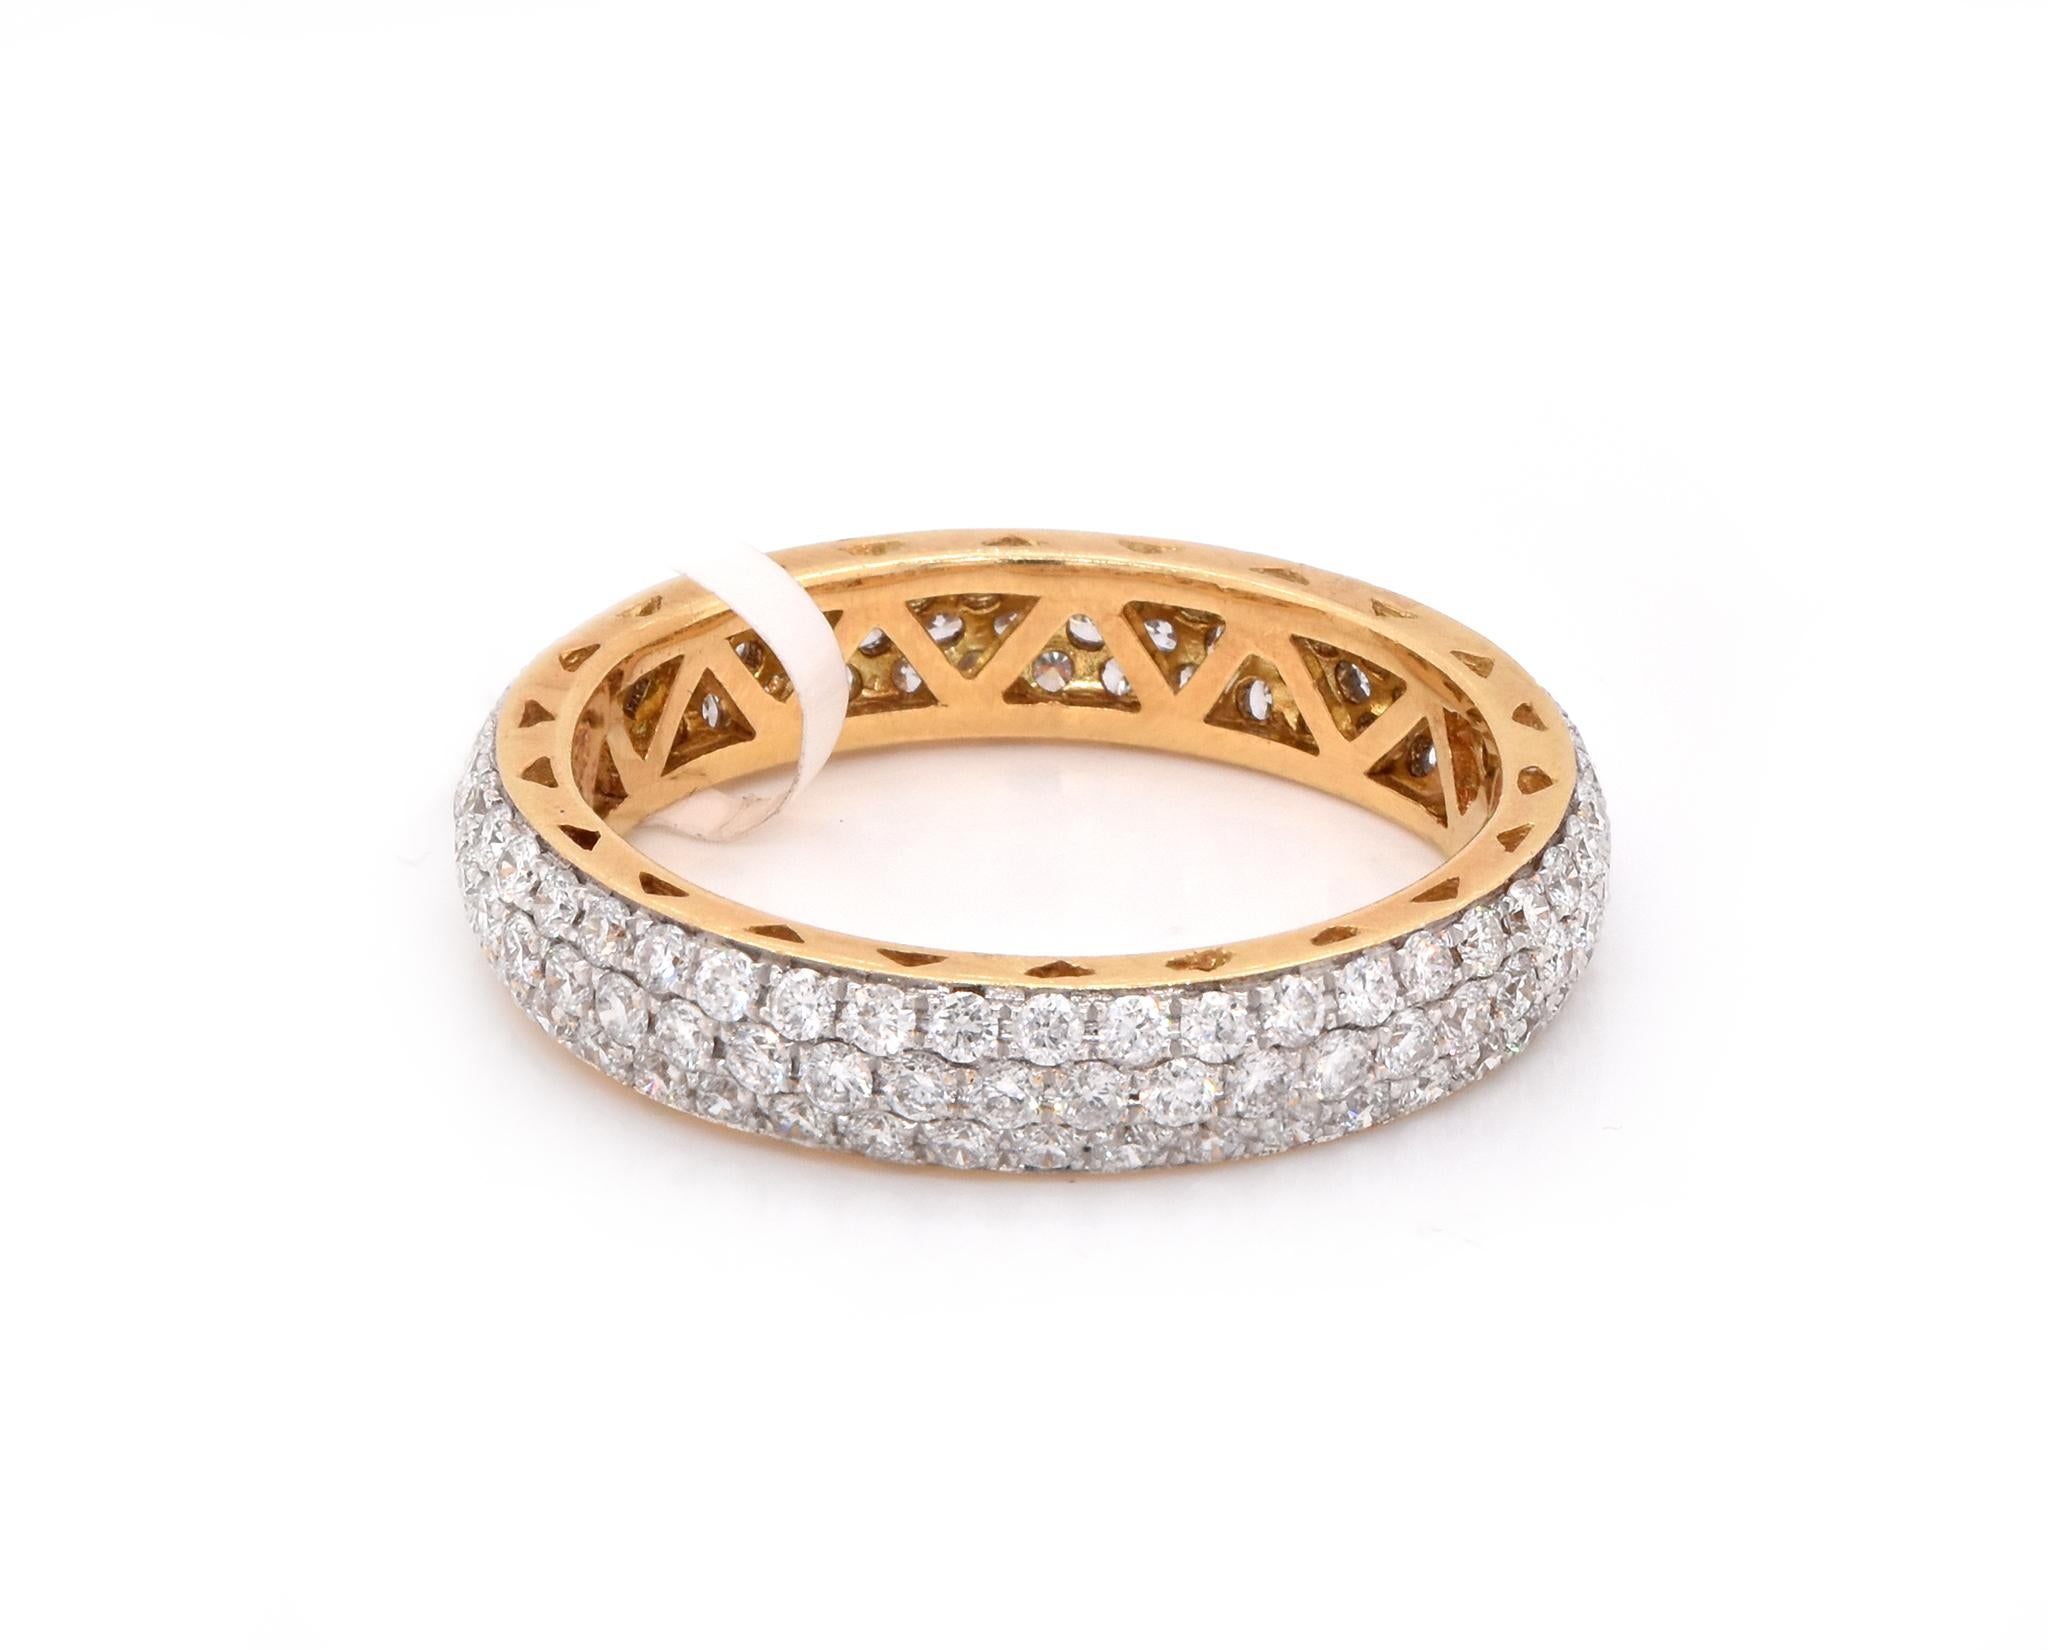 Designer: Custom
Material: 18K yellow gold
Diamonds: 129 round cut = 1.38cttw
Color: G
Clarity: VS
Size: 7
Dimensions: ring measures 4mm in width
Weight: 3.90 grams
